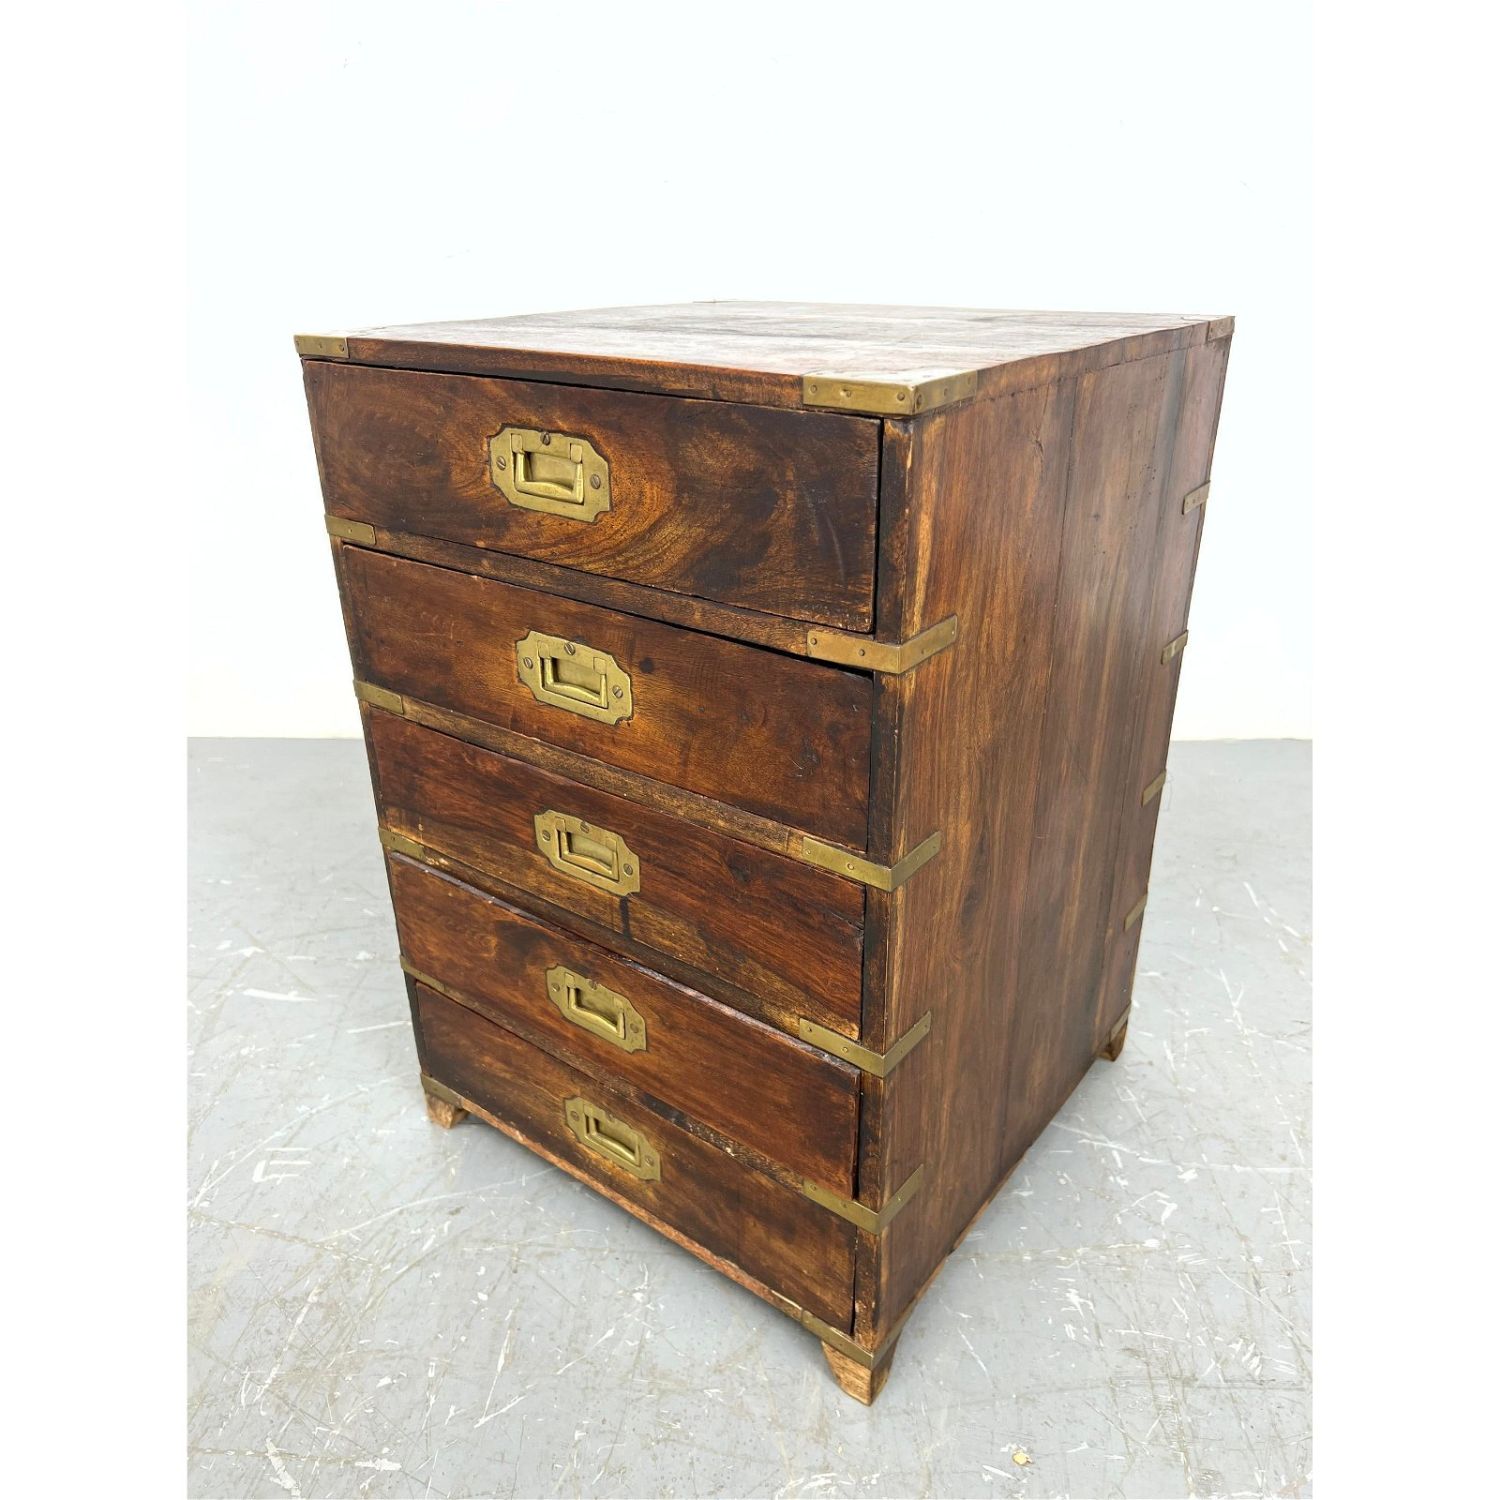 5 Drawer Rosewood Campaign Chest 362d4e